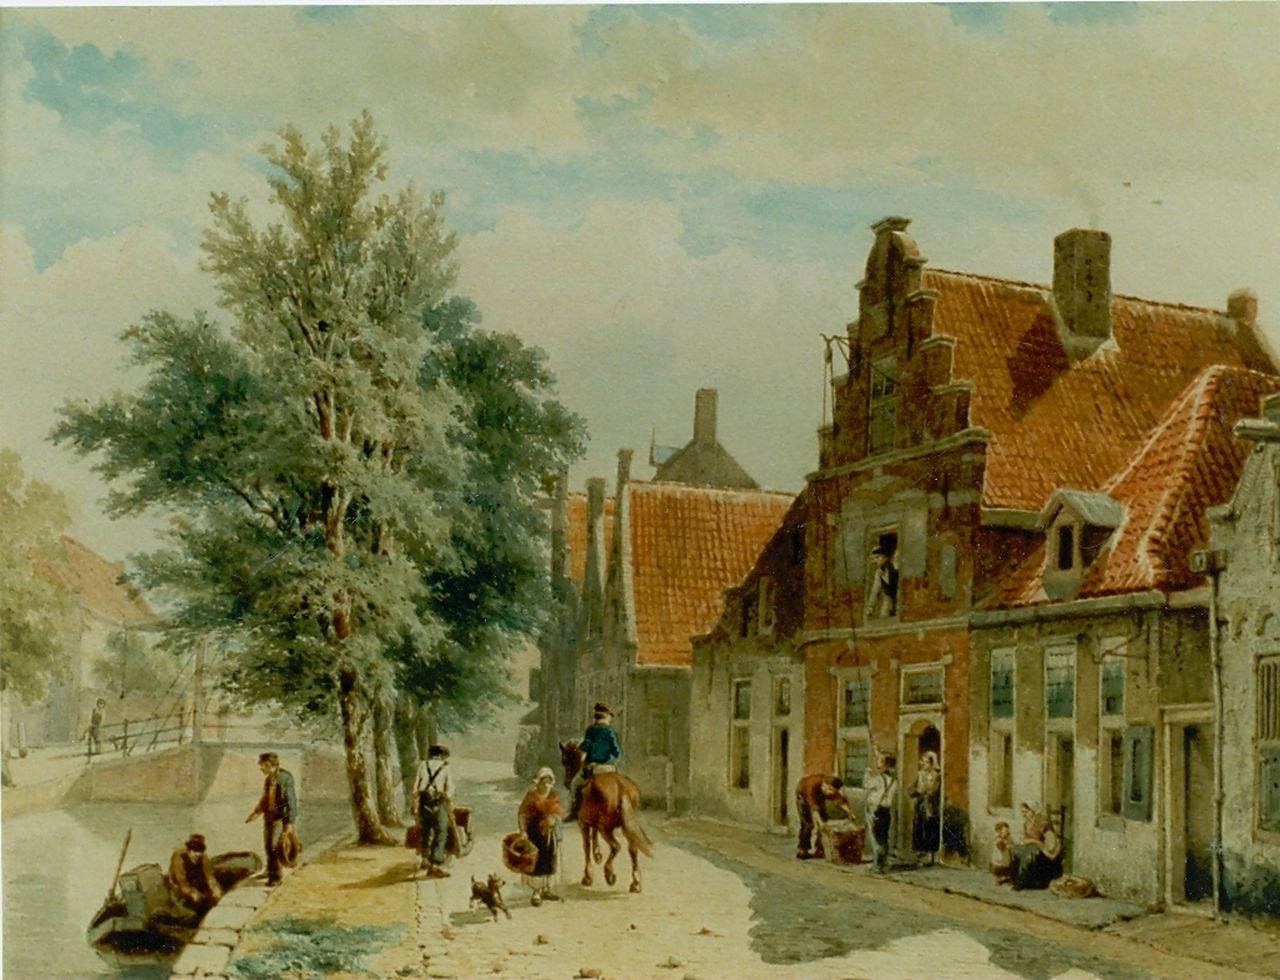 Springer C.  | Cornelis Springer, A view of the Burgwal, Haarlem, watercolour on paper 30.5 x 40.5 cm, signed l.r. and dated 1843